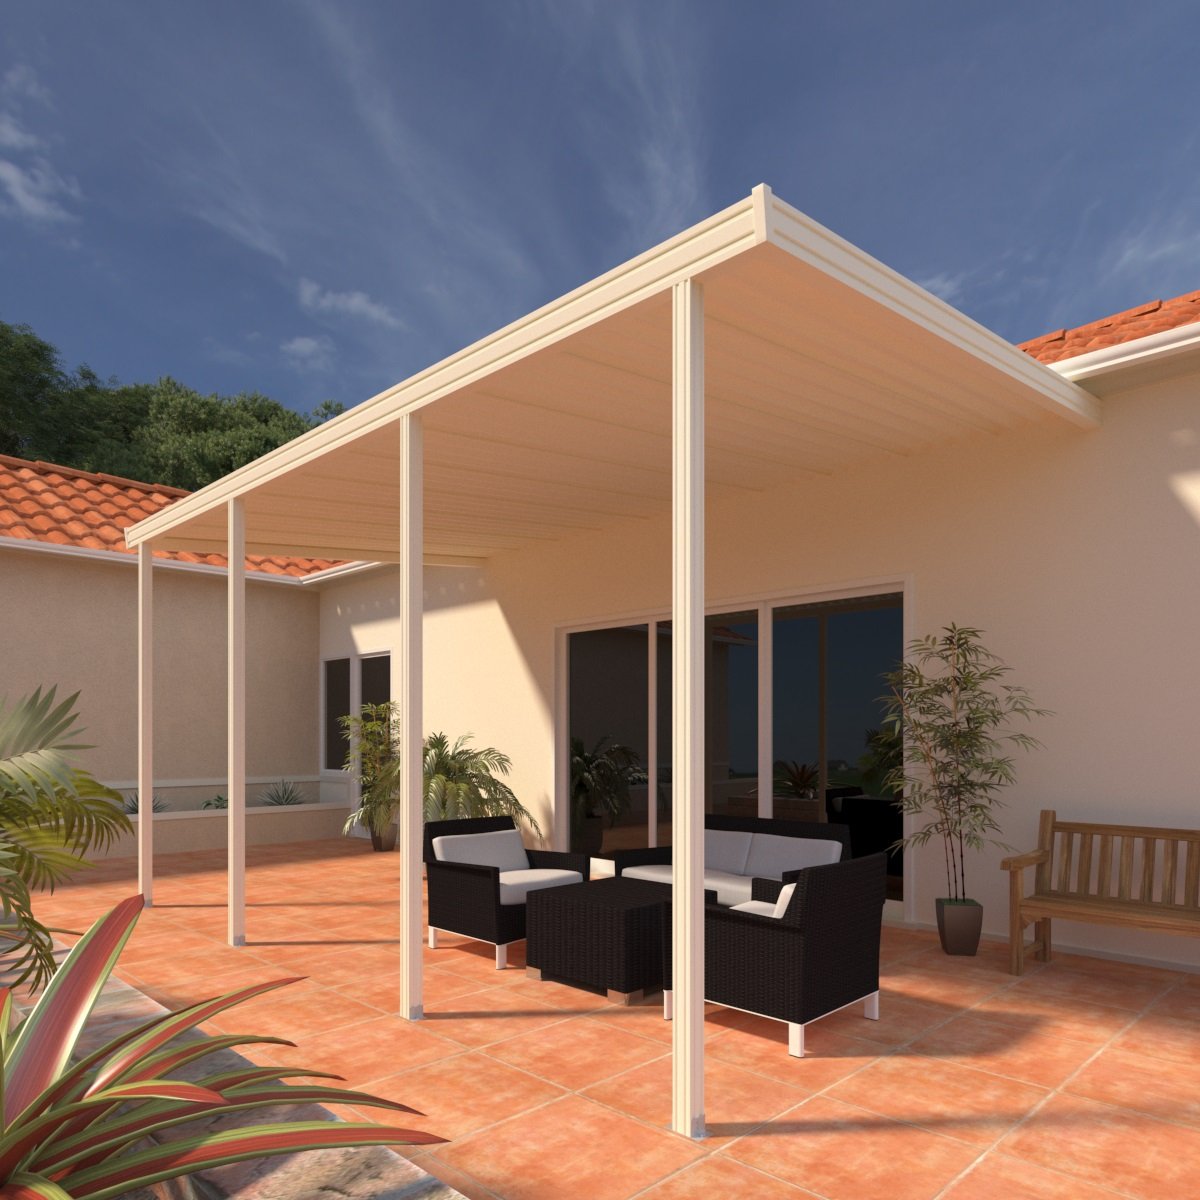 10 ft. Deep x 24 ft. Wide Ivory Attached Aluminum Patio Cover -4 Posts - (10lb Low Snow Area)